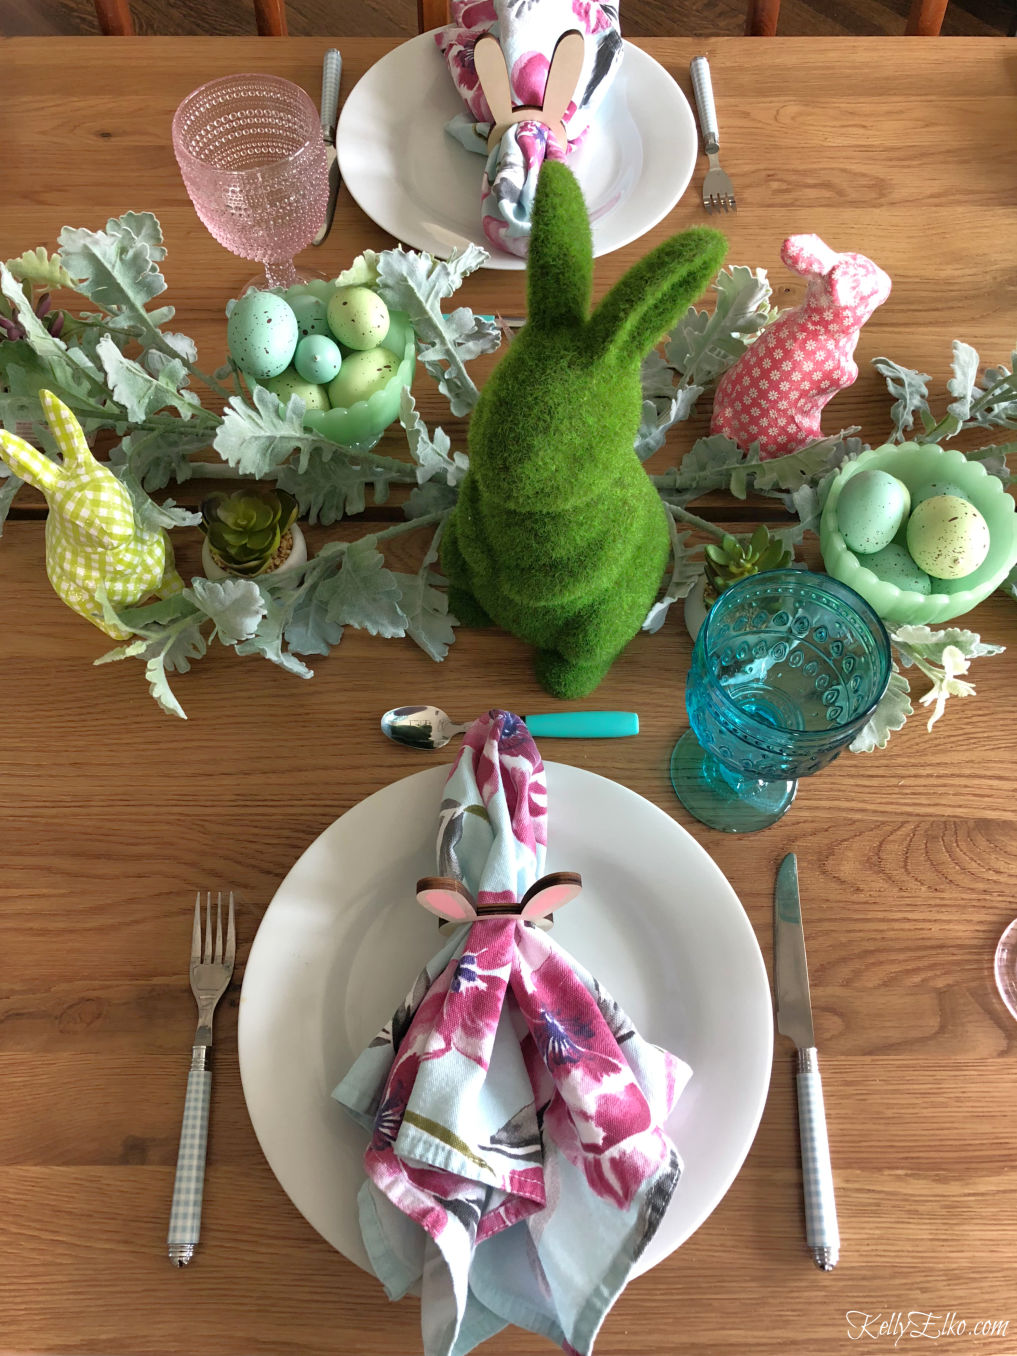 Spring bunny centerpiece - love the pink and blue color scheme on this fun Easter table kellyelko.com #easter #easterdecor #spring #springdecor #springtable #centerpiece #springcenterpiece #easterbunny #bunny